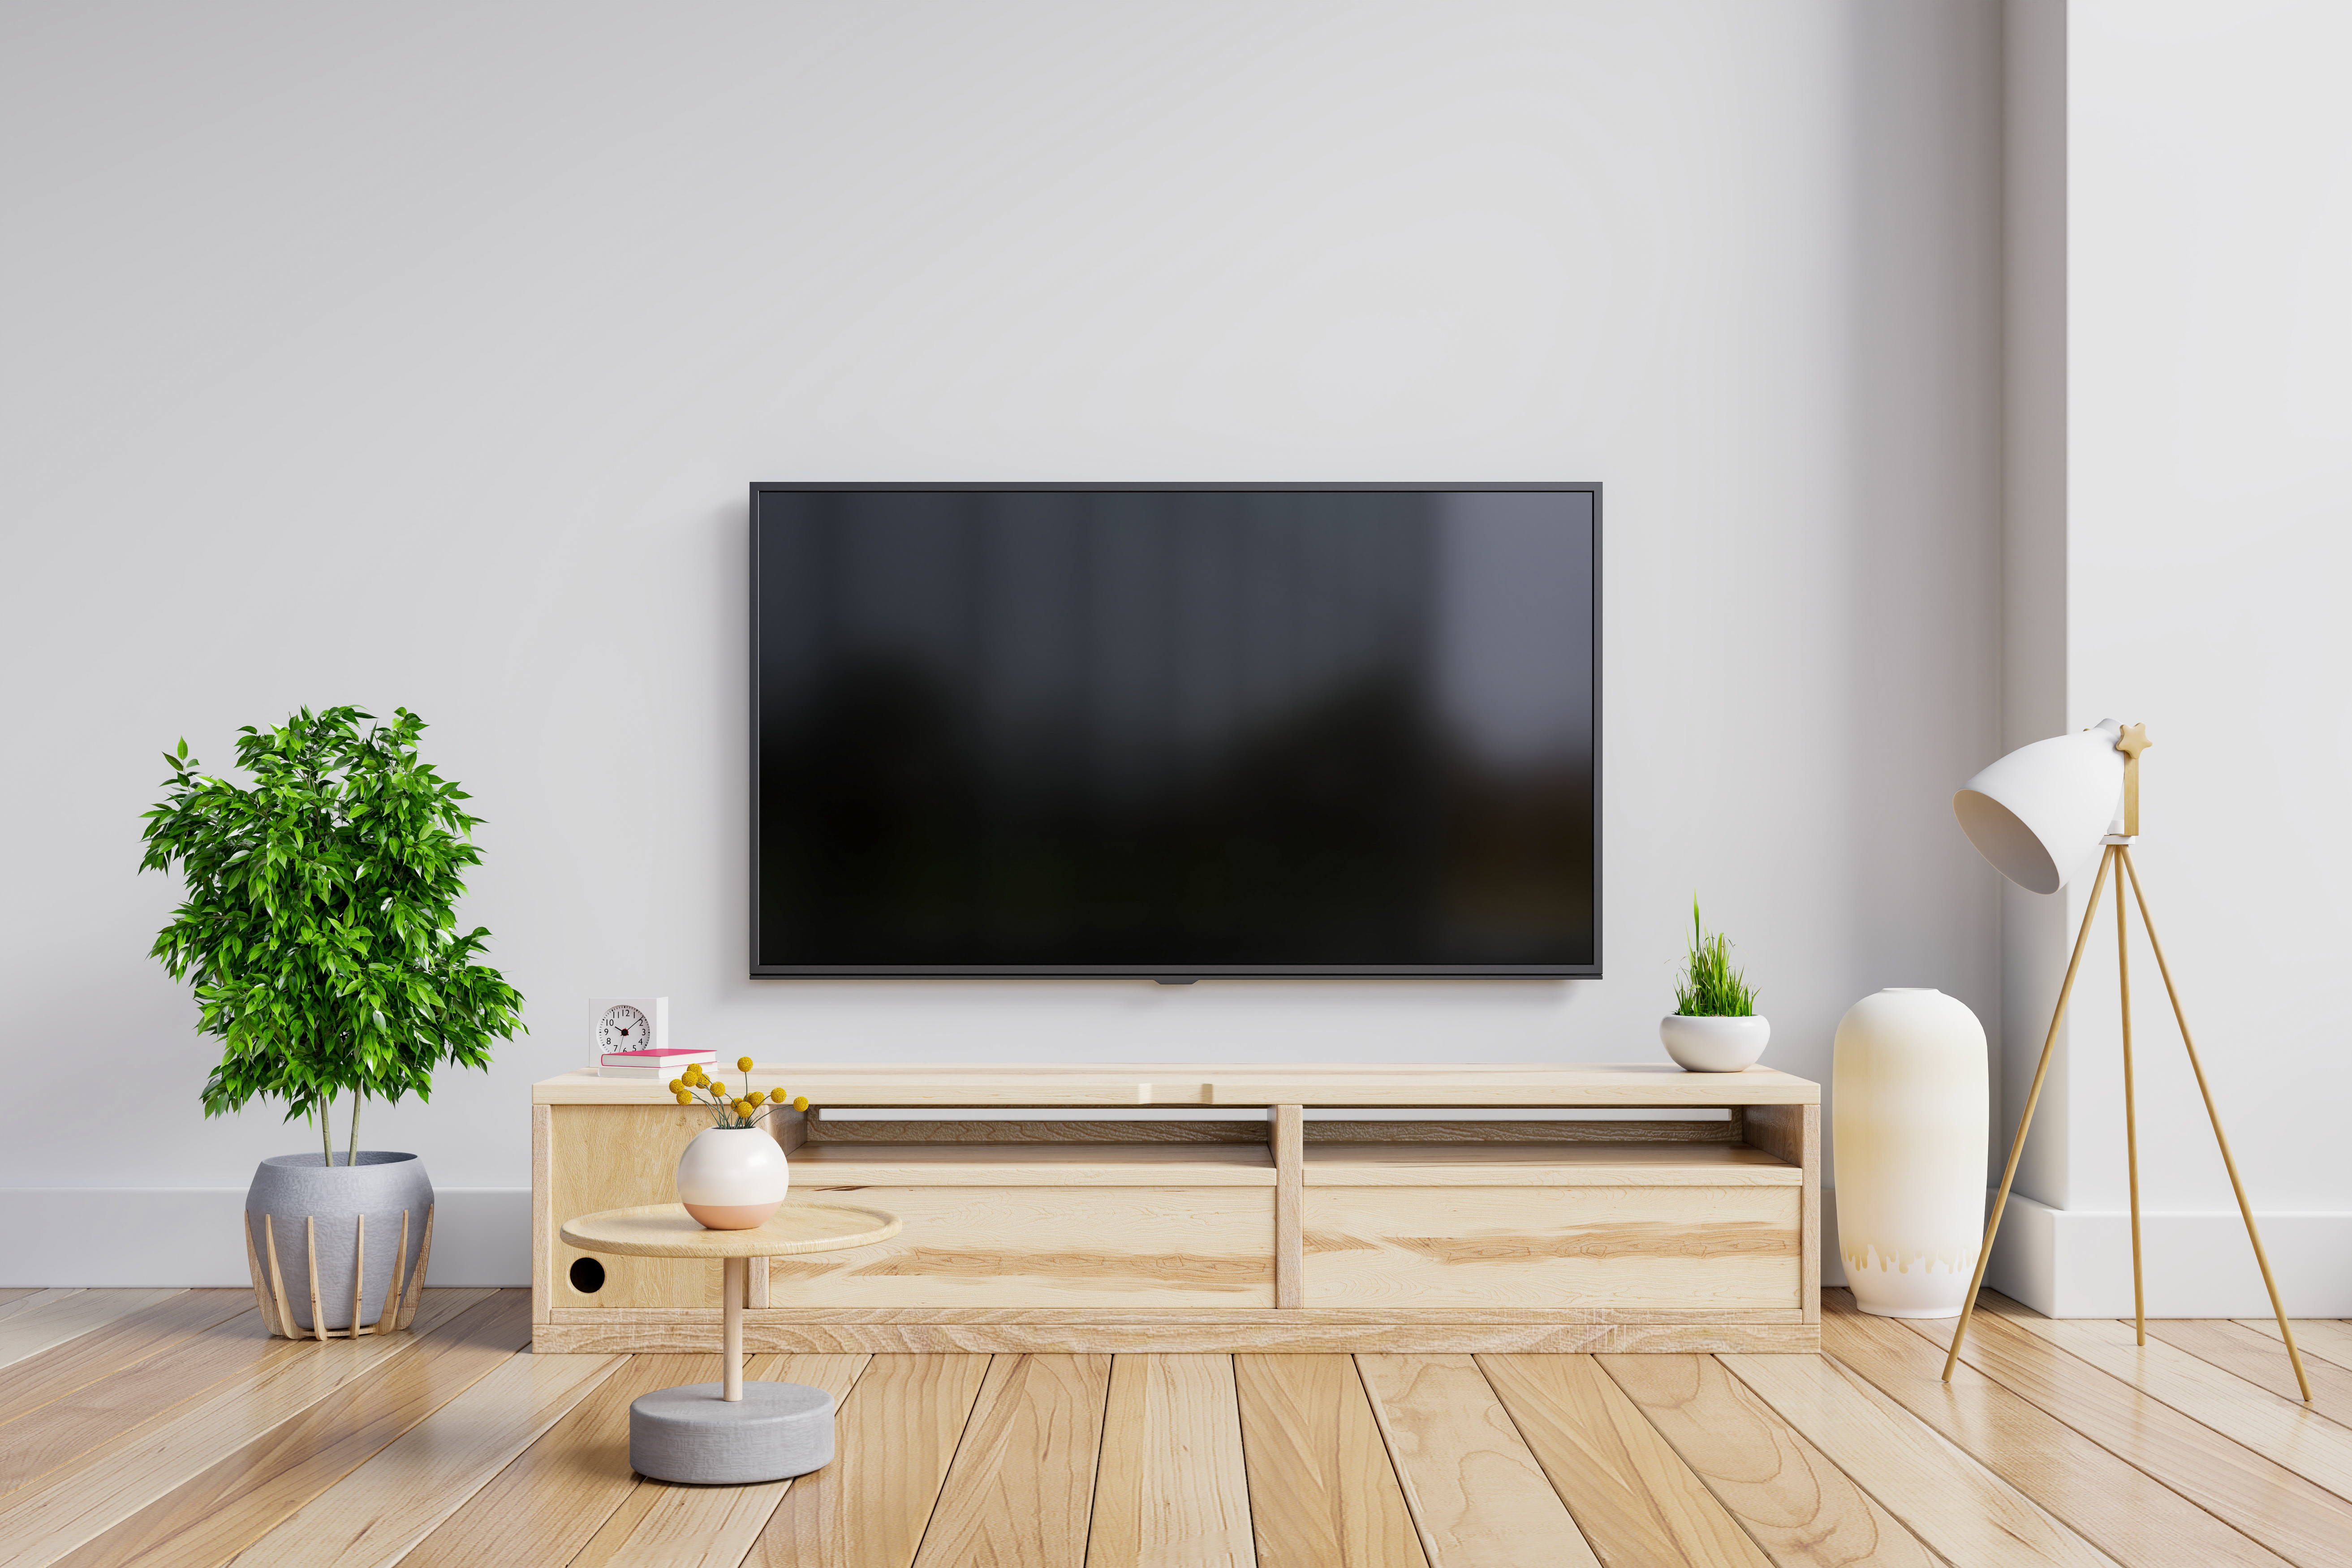 HDTV with no content displayed mounted on a wall in a living room setting with a small table in the foreground